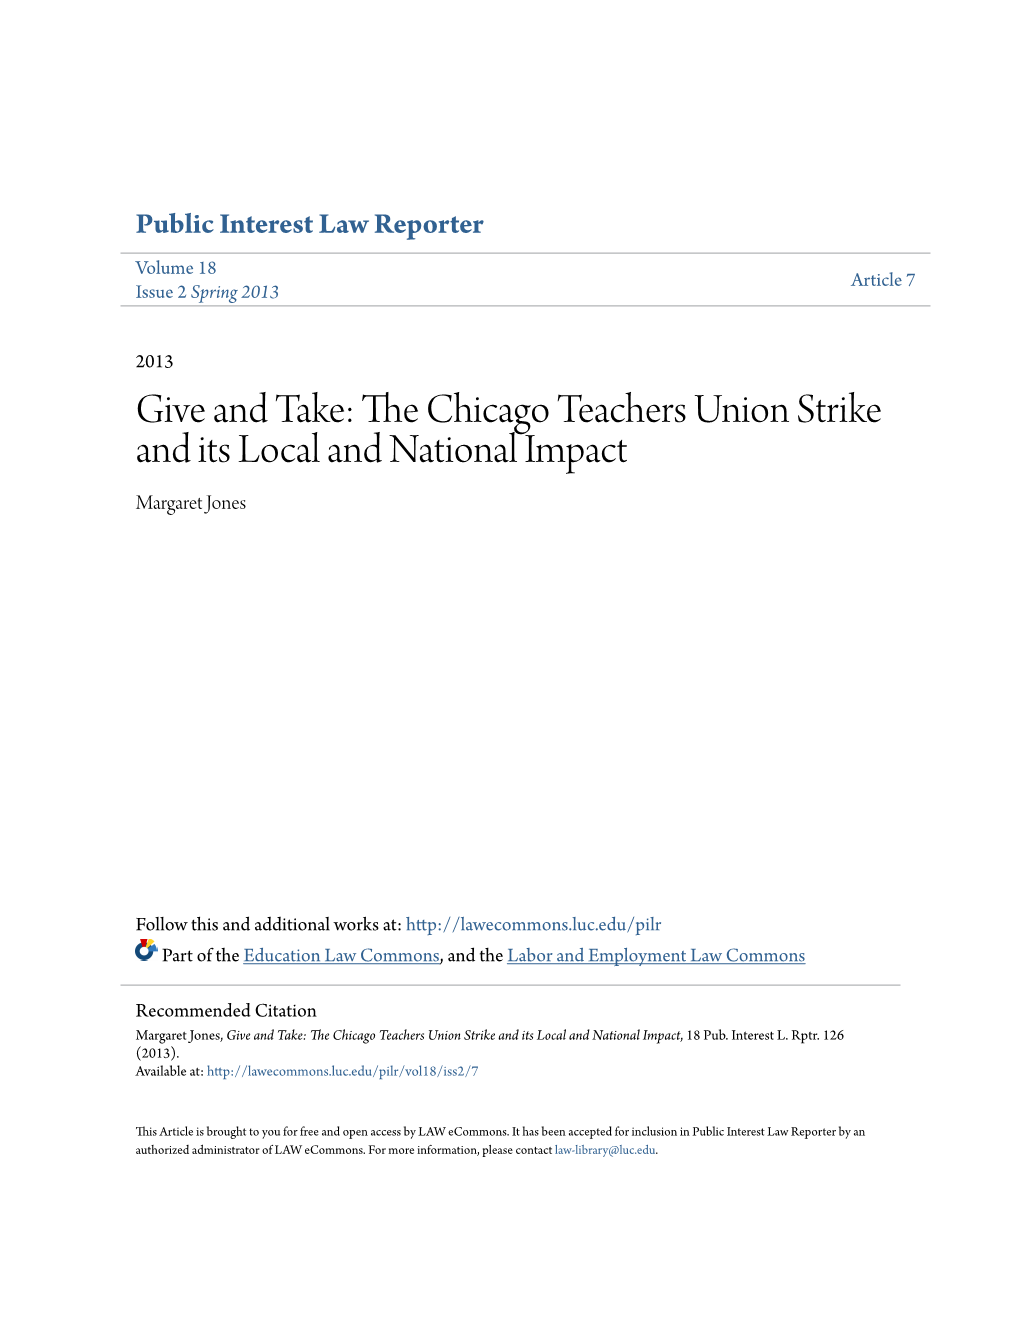 The Chicago Teachers Union Strike and Its Local and National Impact, 18 Pub